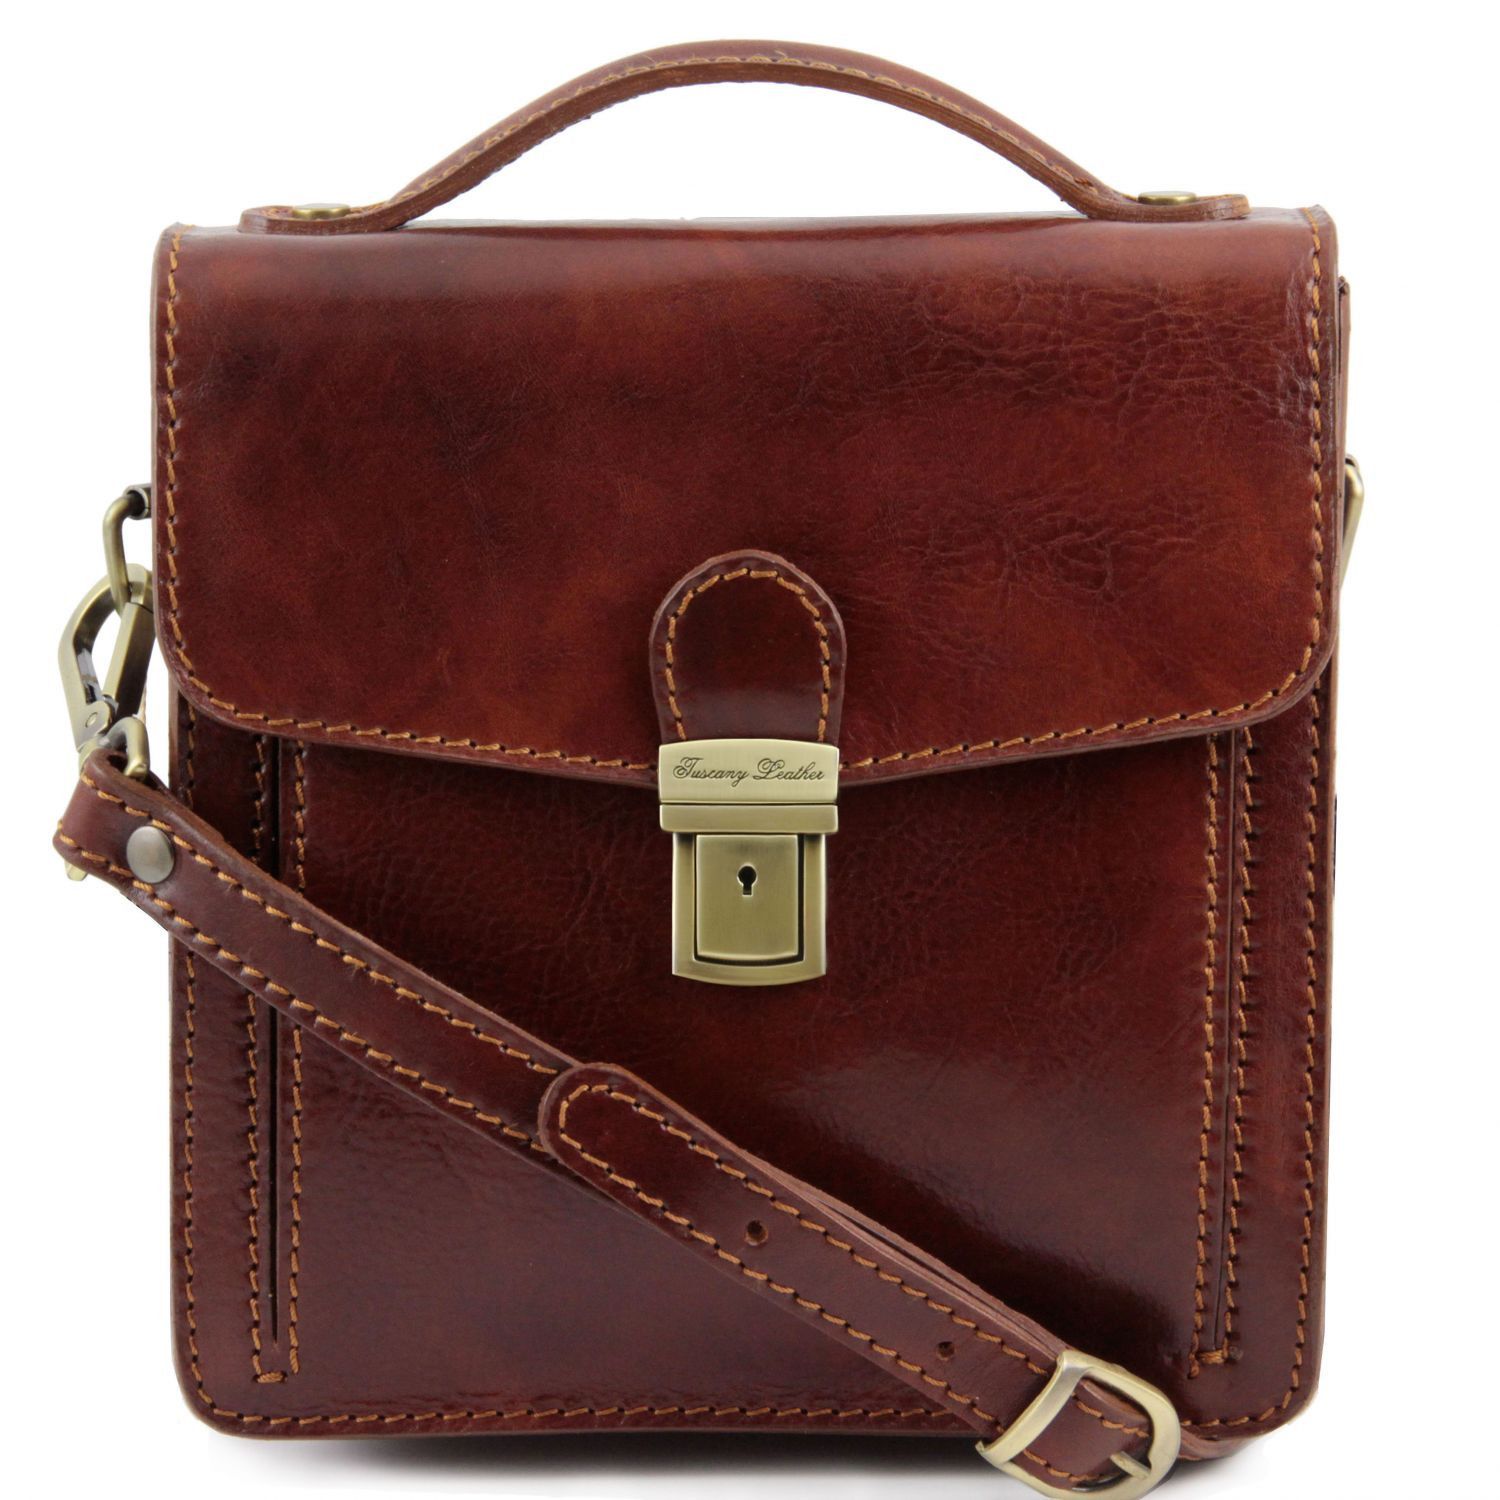 David Leather Crossbody Bag Small Size Brown TL140931